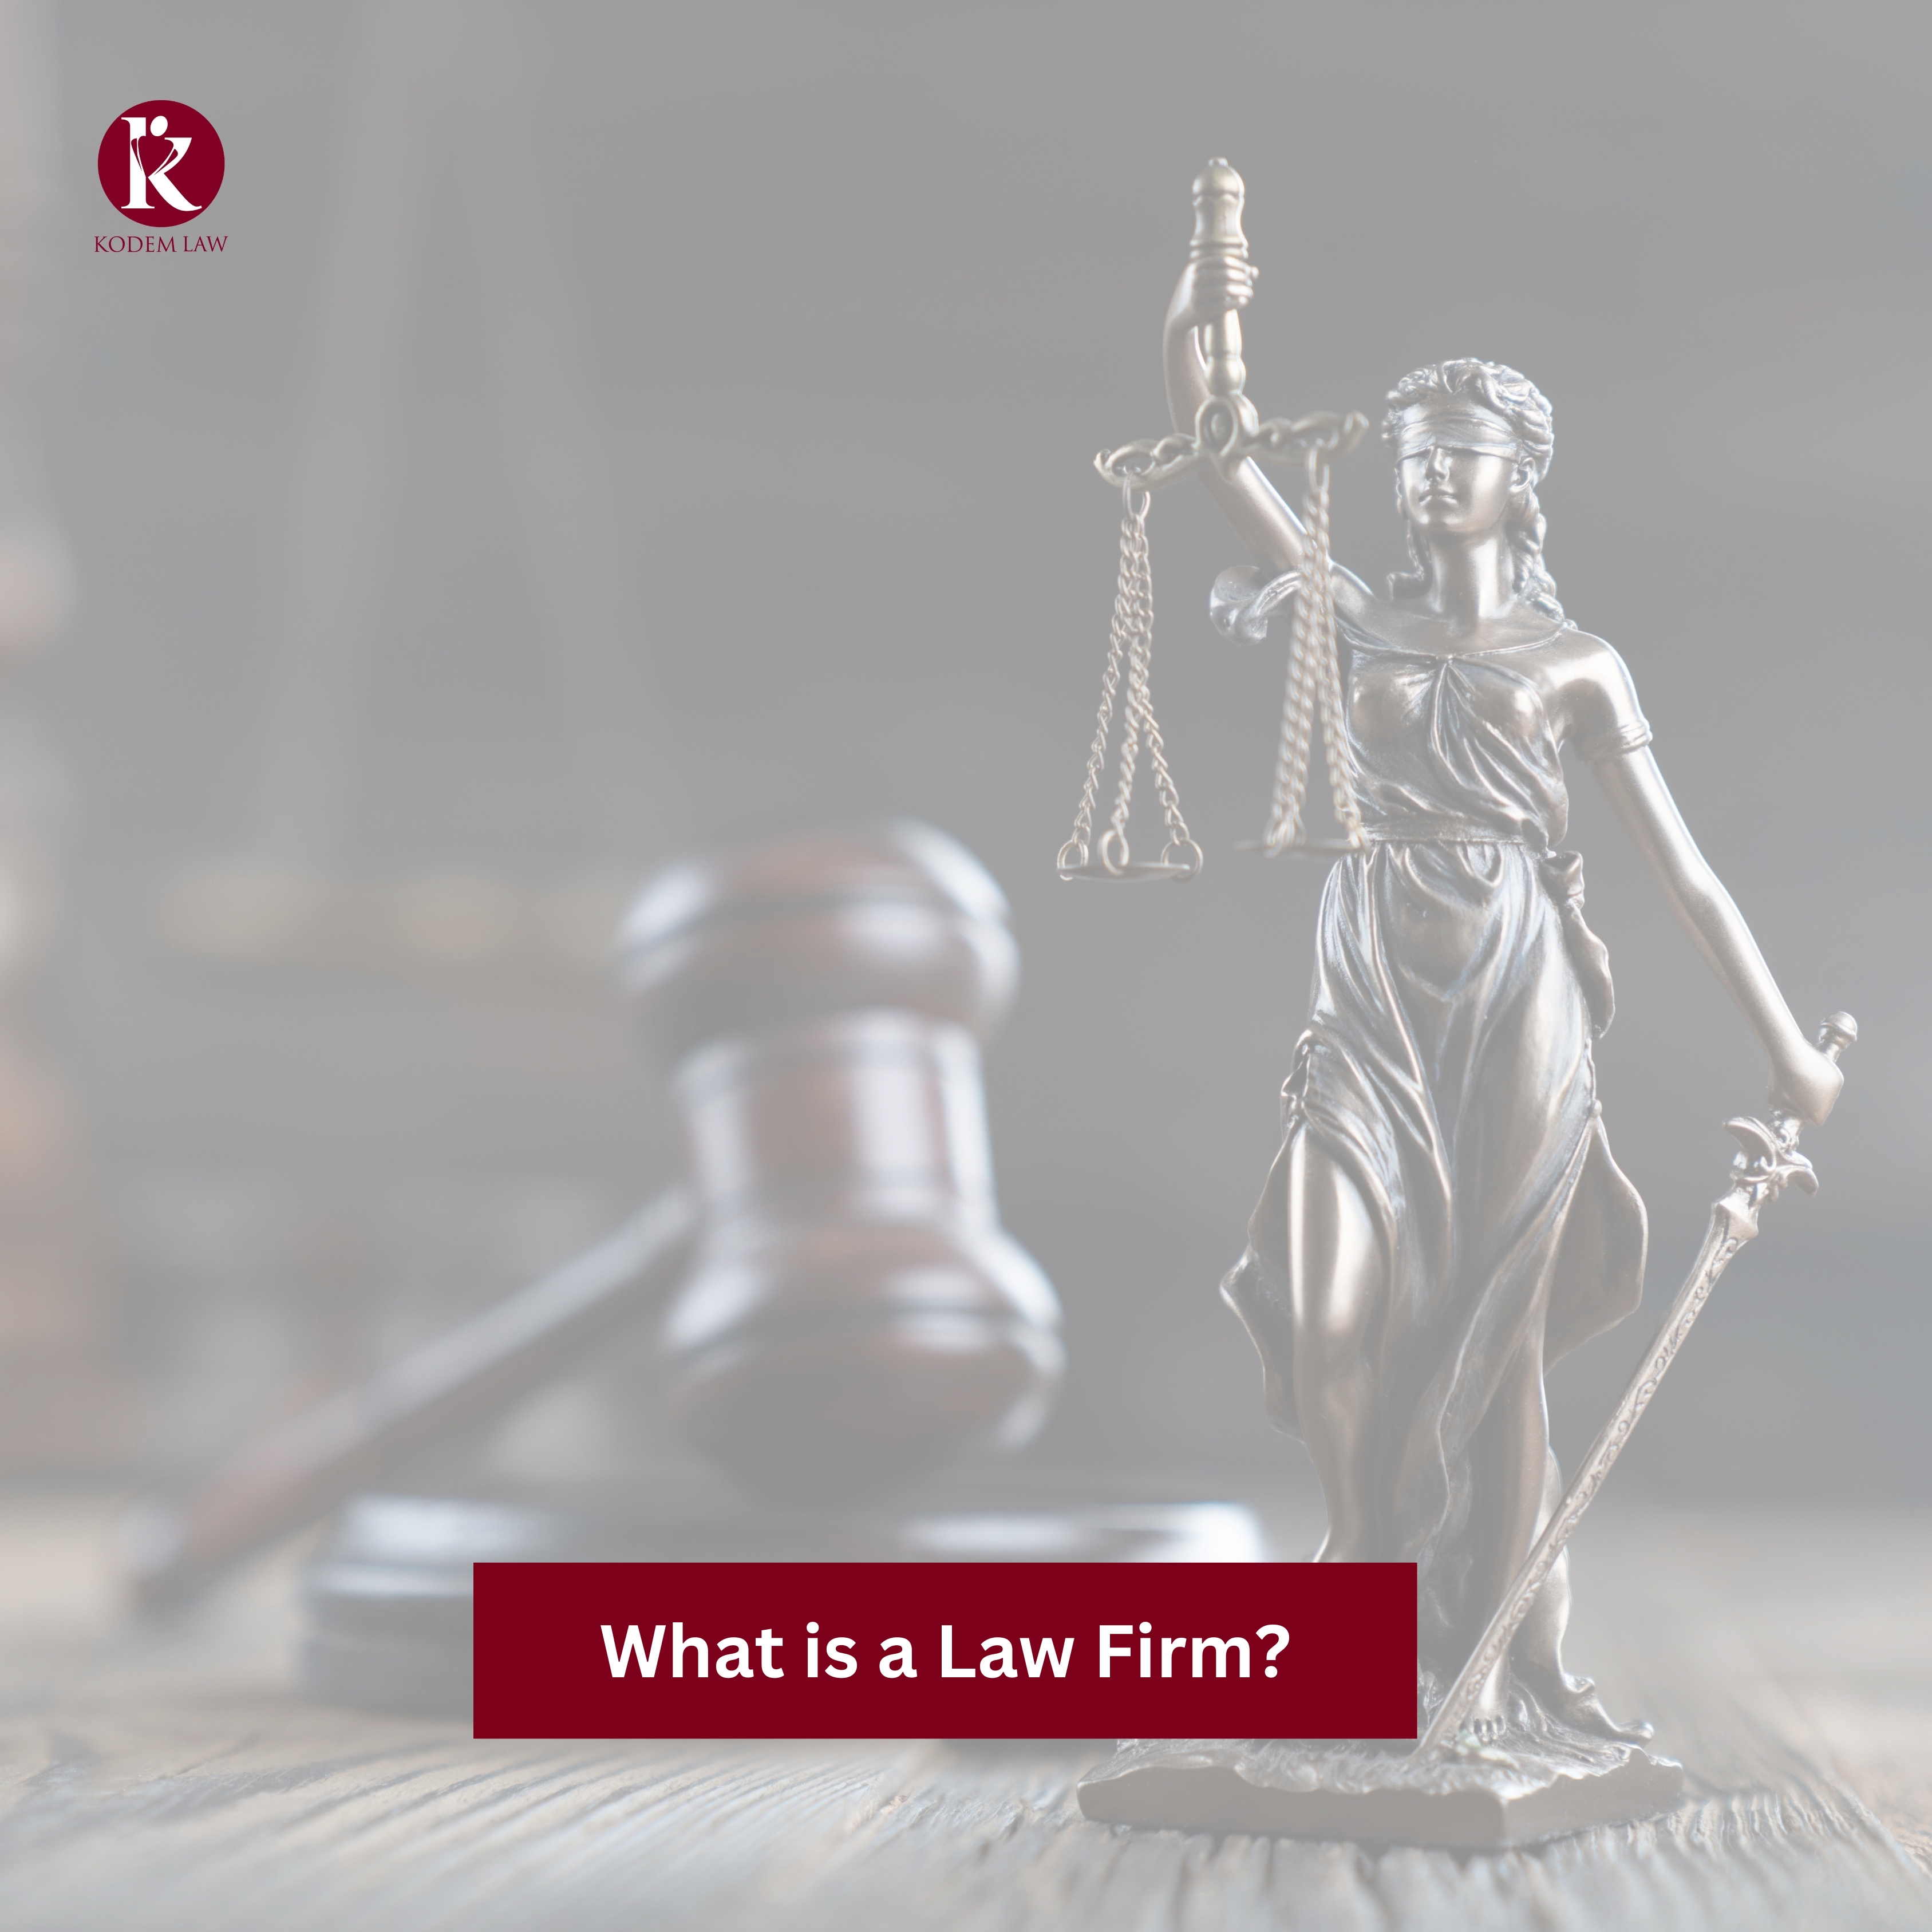 What is a Law Firm?